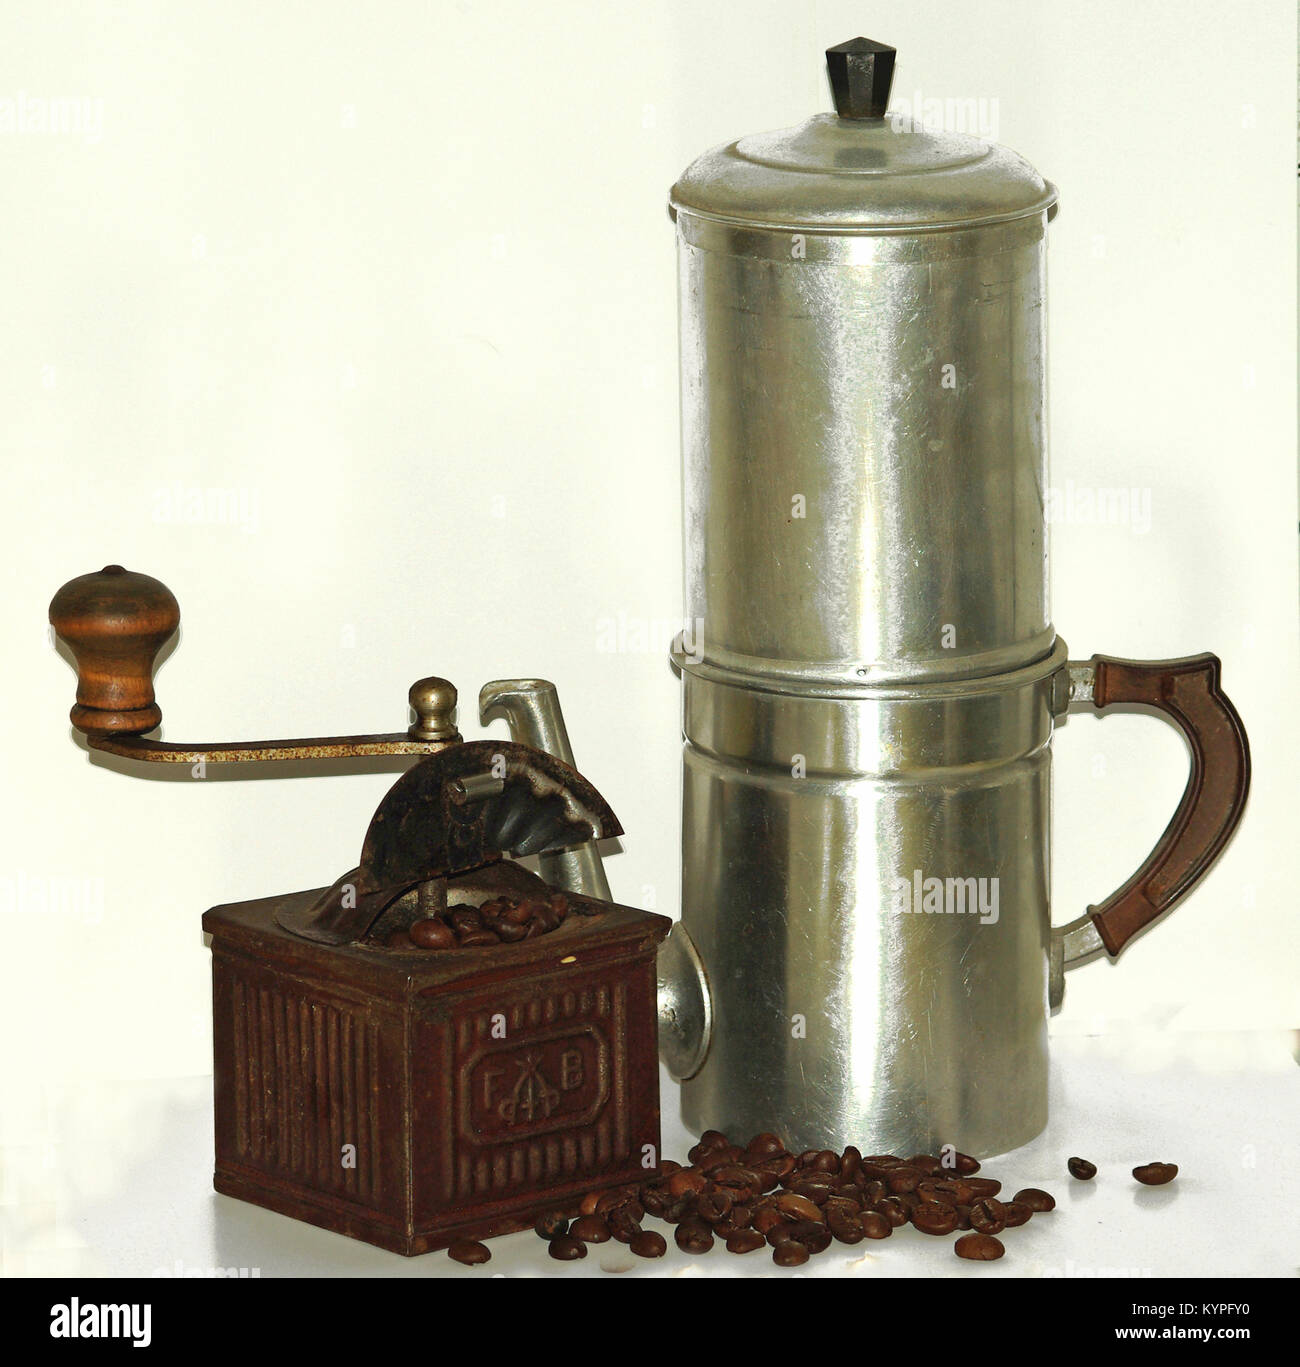 https://c8.alamy.com/comp/KYPFY0/coffee-beans-with-ancient-grinder-and-neapolitan-coffee-maker-KYPFY0.jpg